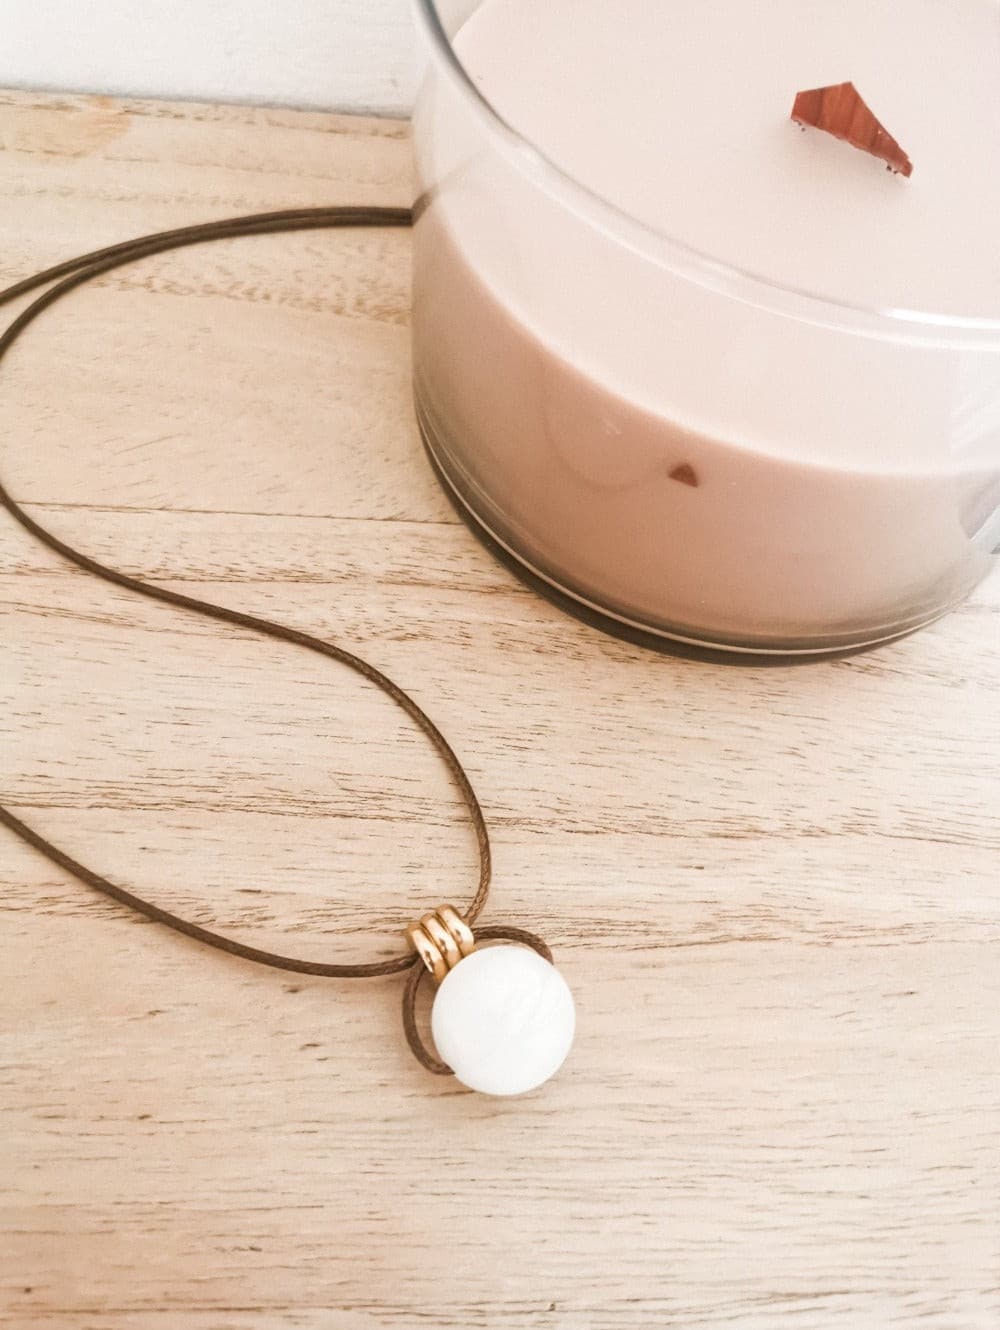 The Antique Pearl Breastfeeding & teething Necklace with gold detail is perfect for fiddling, chewing or playing with whilst nursing or teething, worn by mum. on wooden background laid flat.